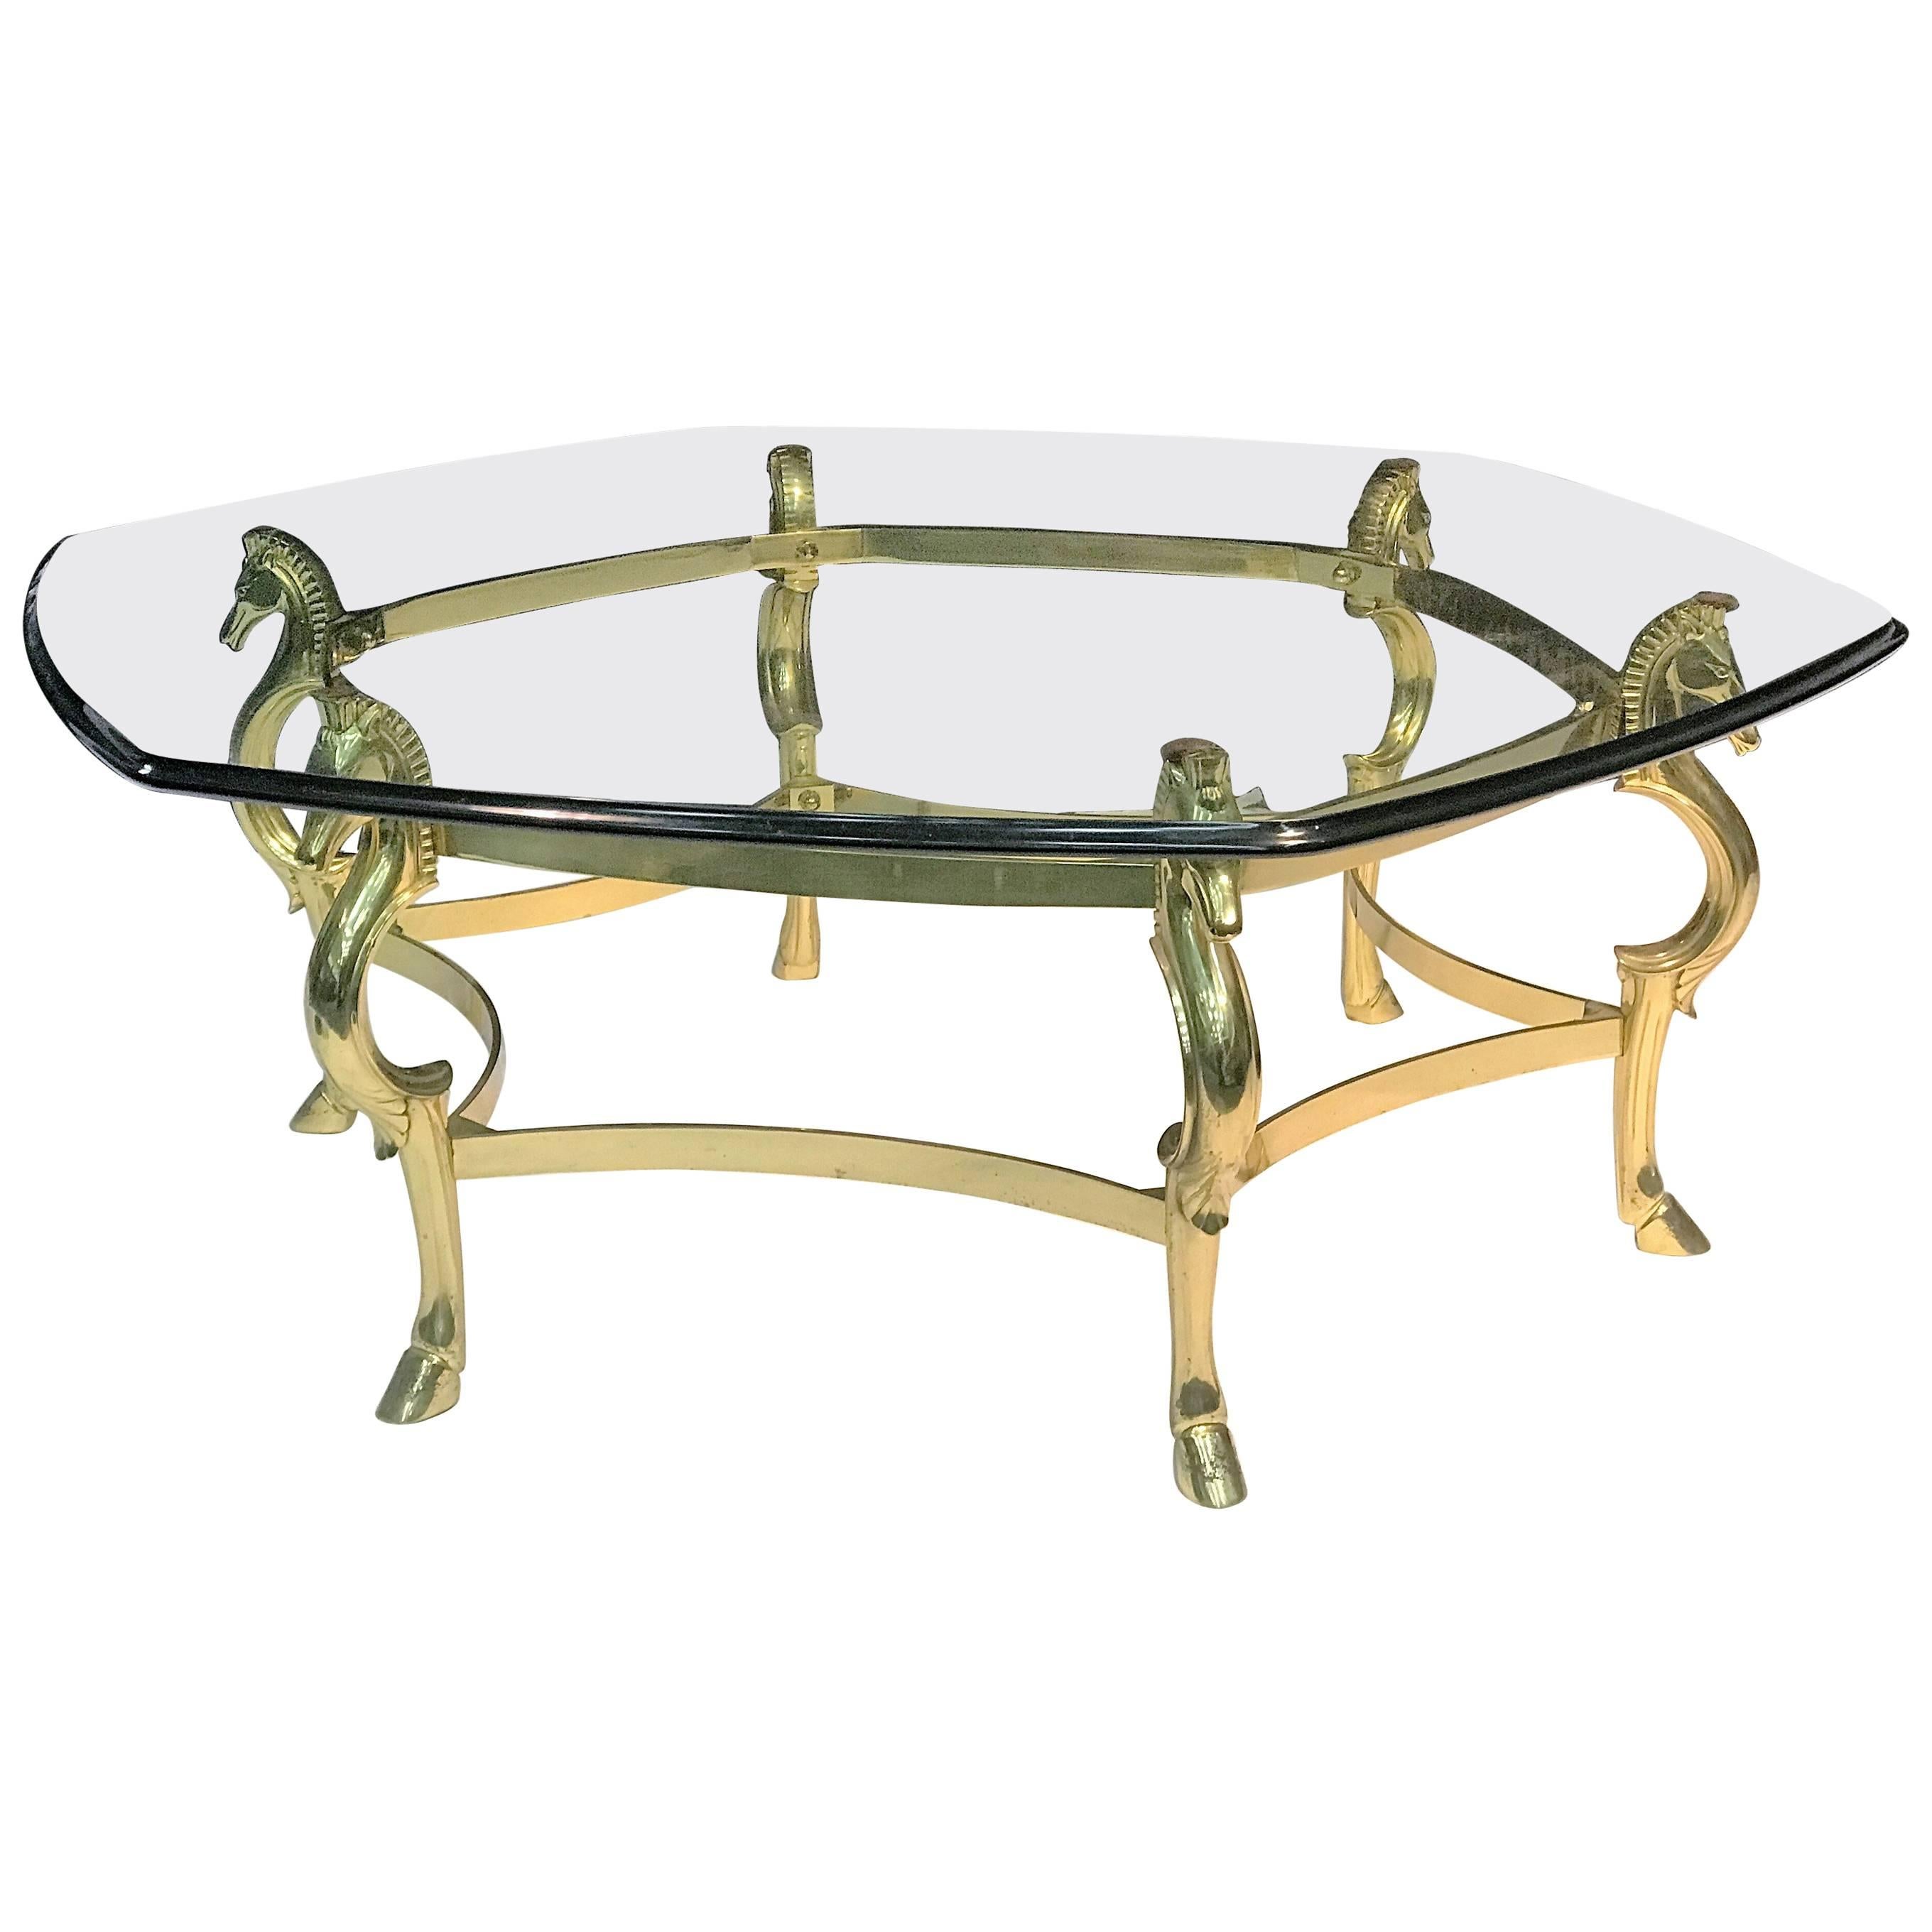 Gorgeous Italian Polished Brass Seahorse and Hooves Coffee Table For Sale